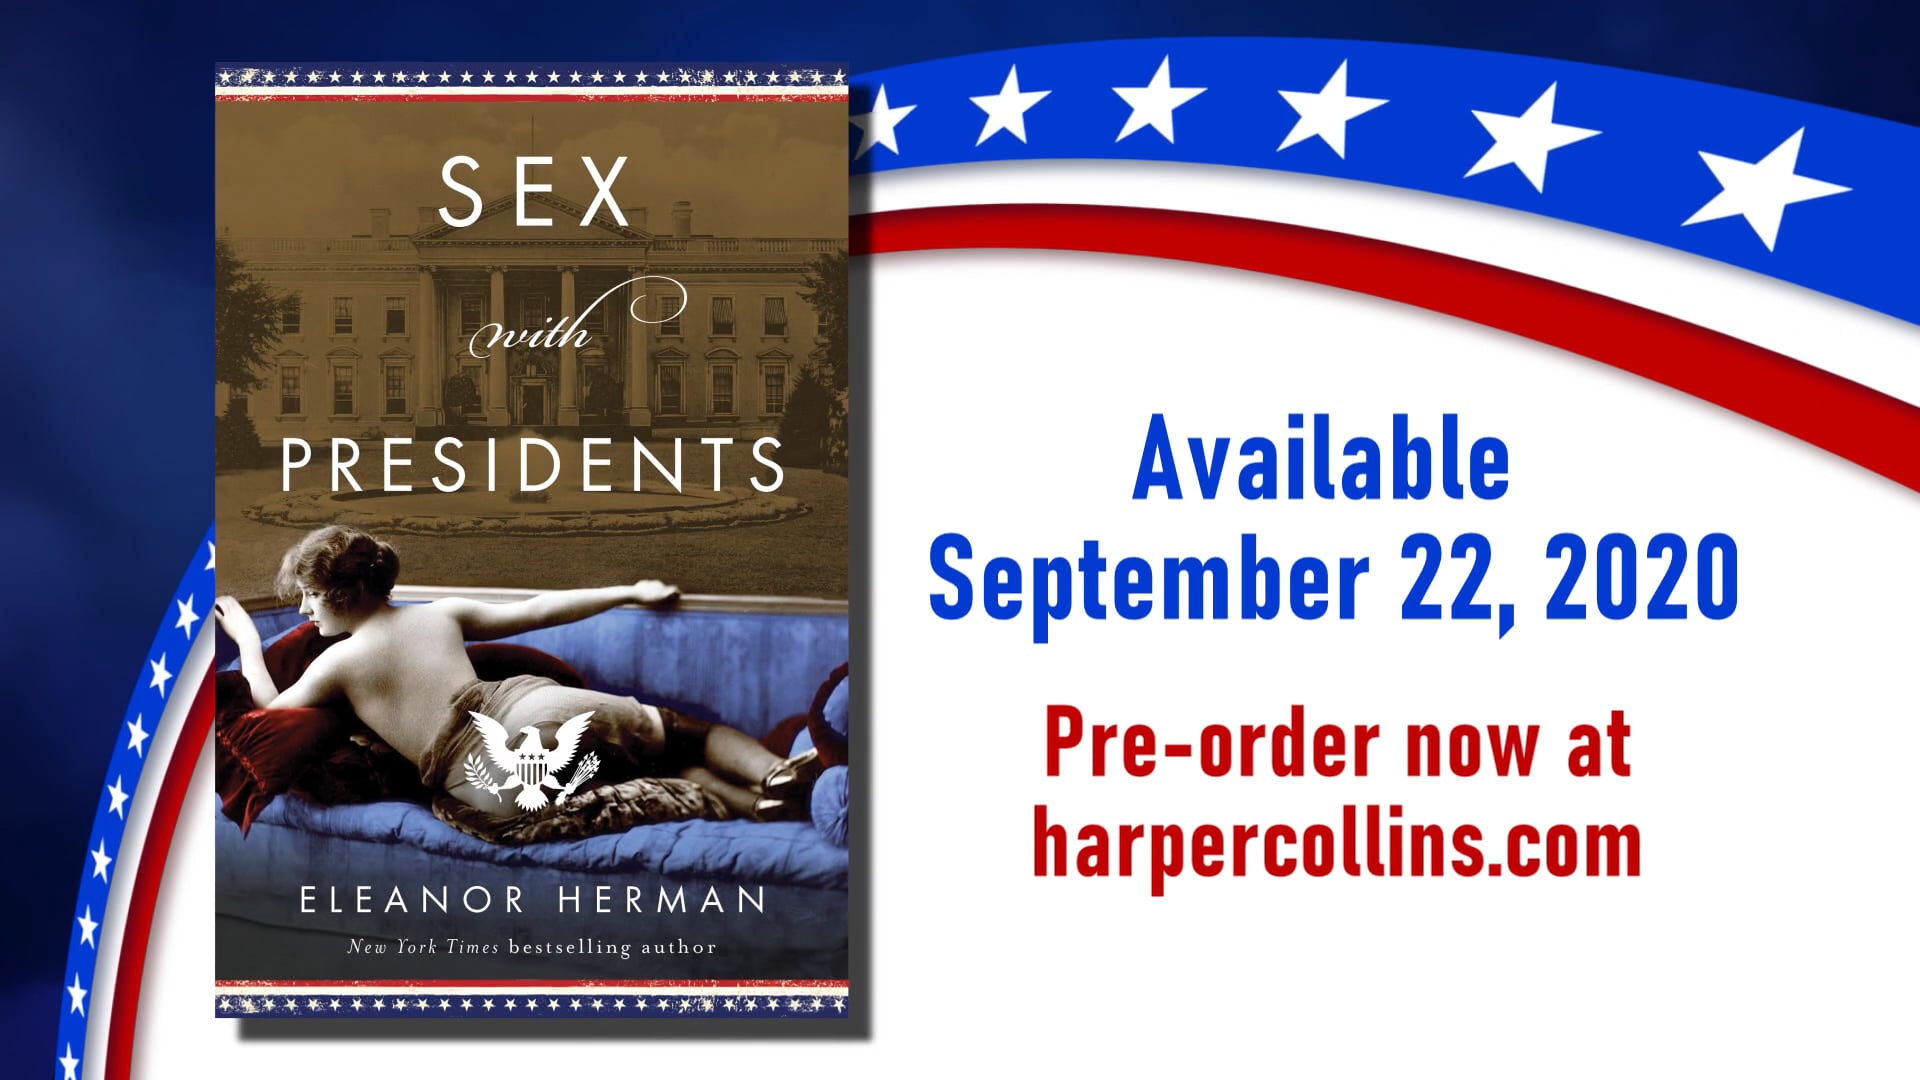 Sex With Presidents Book Promo 1 The Ins and Outs of Love and Lust in the White House by Eleanor Herman